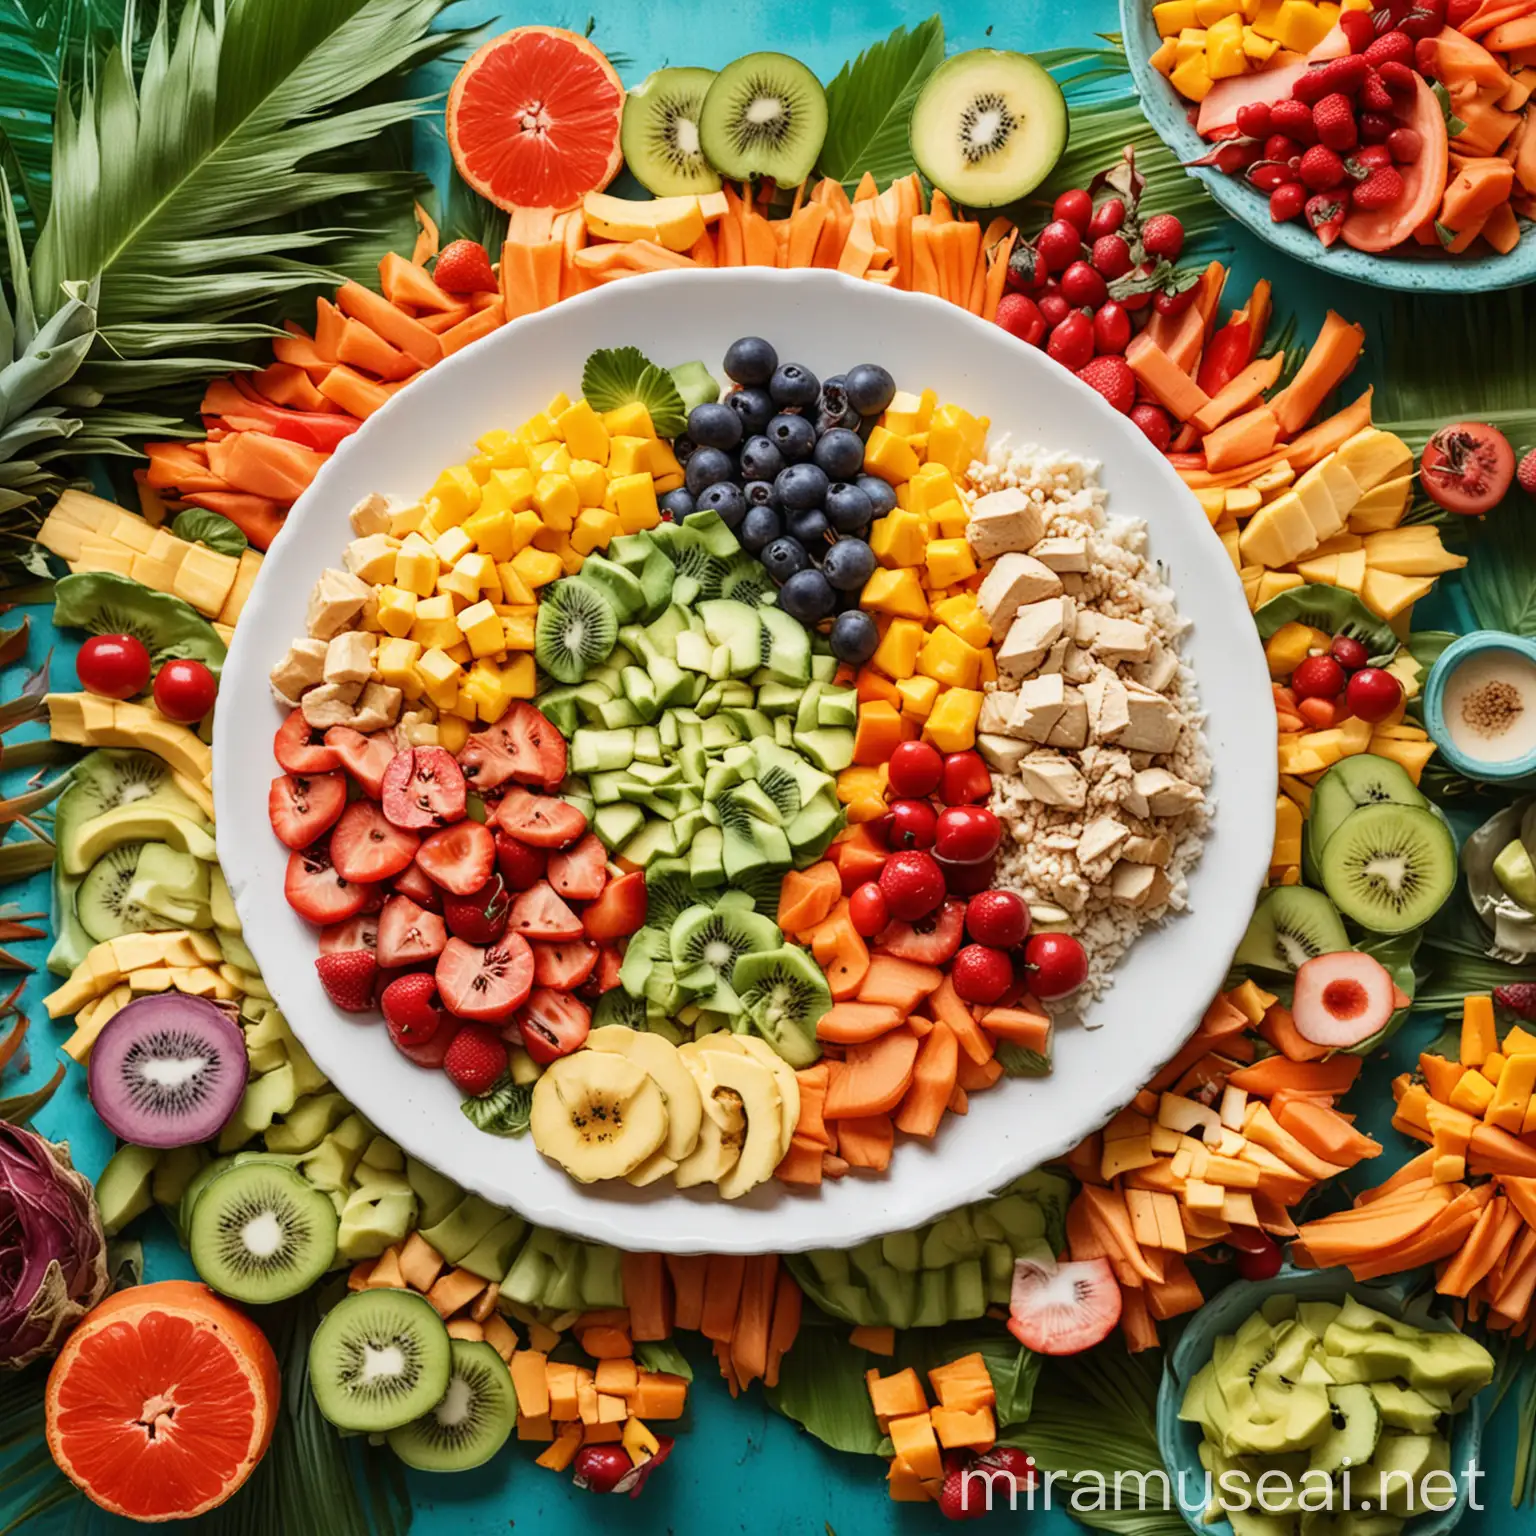 Vibrant Plate of Colorful Healthy Food with Tropical Background